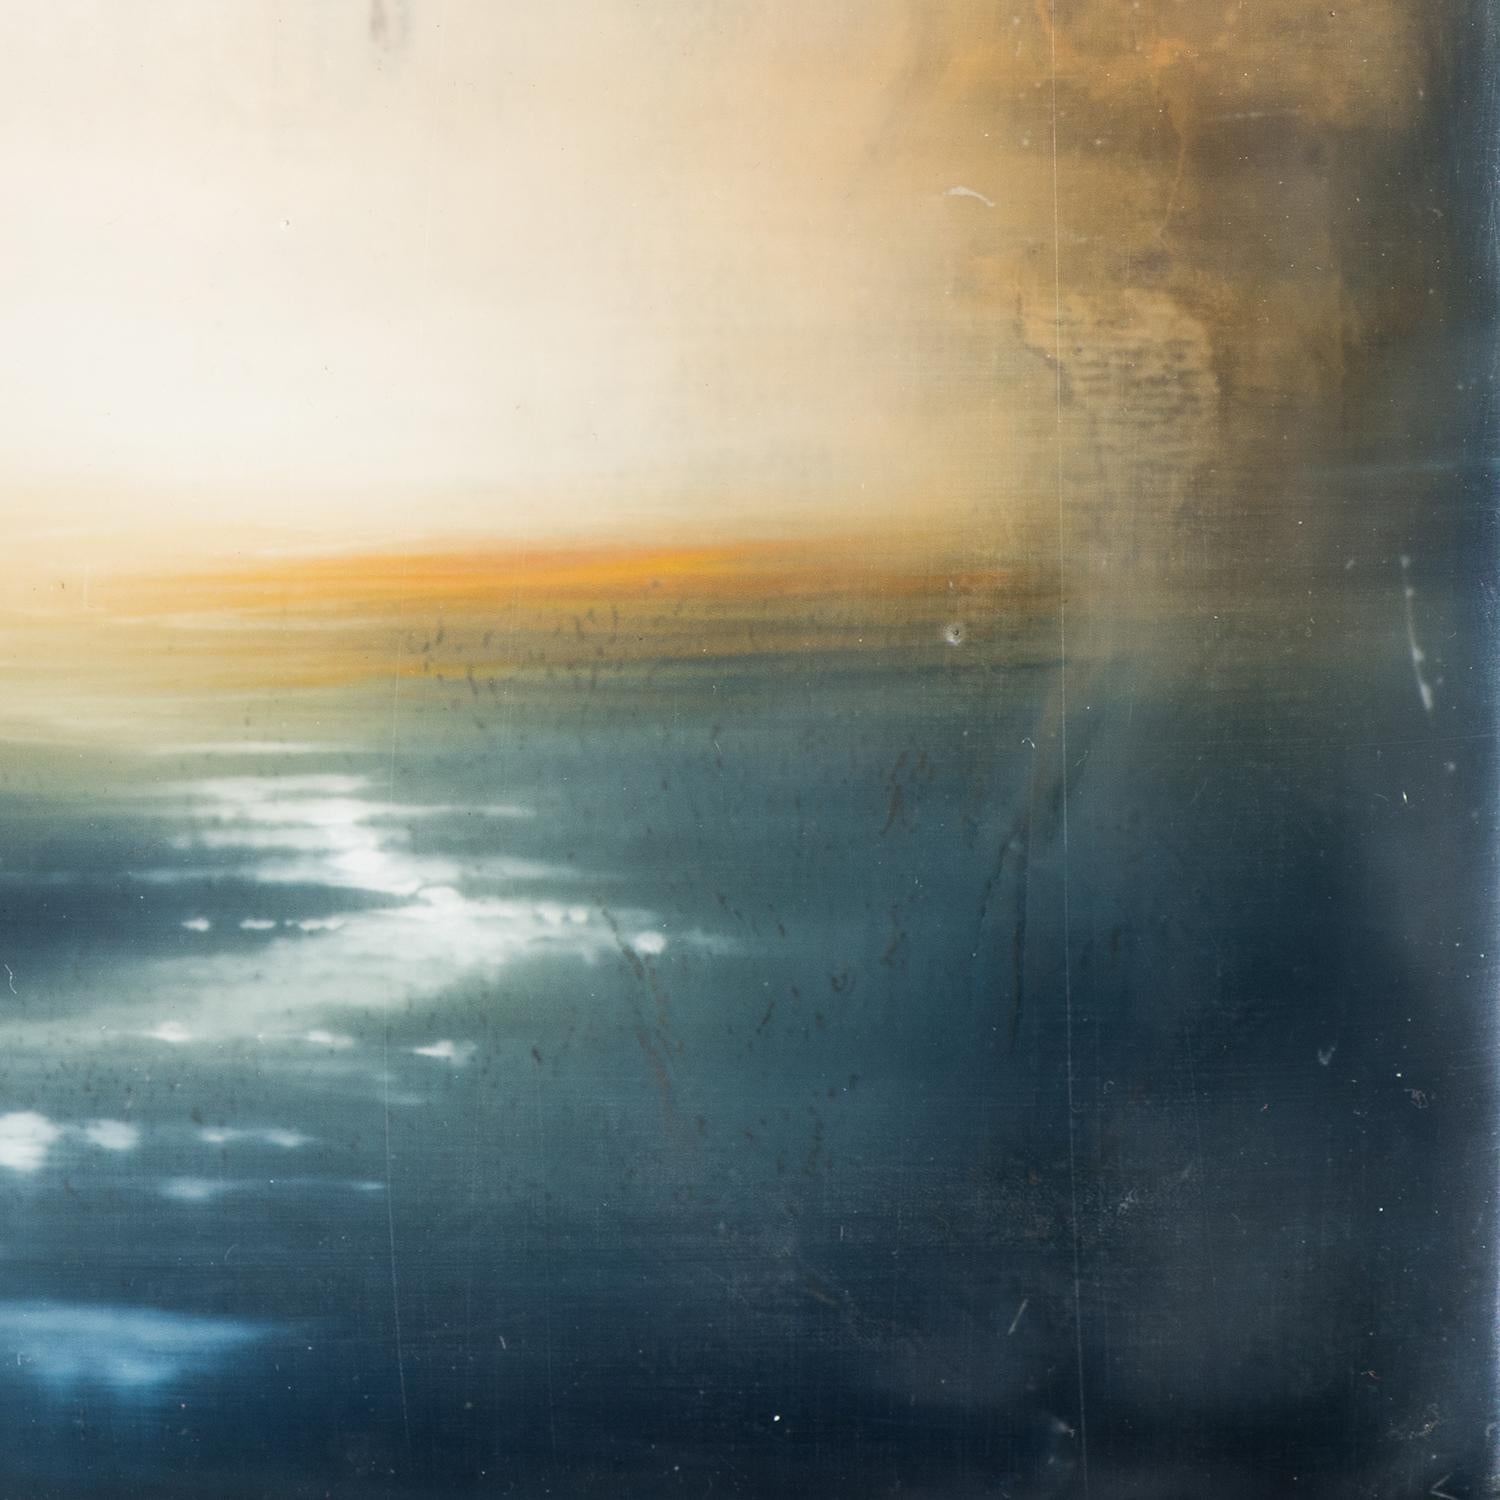 oil and wax on canvas

Neoromantic painter Hiro Yokose fuses multiple layers of wax and oil paint to create mysterious, veiled landscapes illuminated with flashes of light in the sky and reflections on the water. His works are elegant landscapes